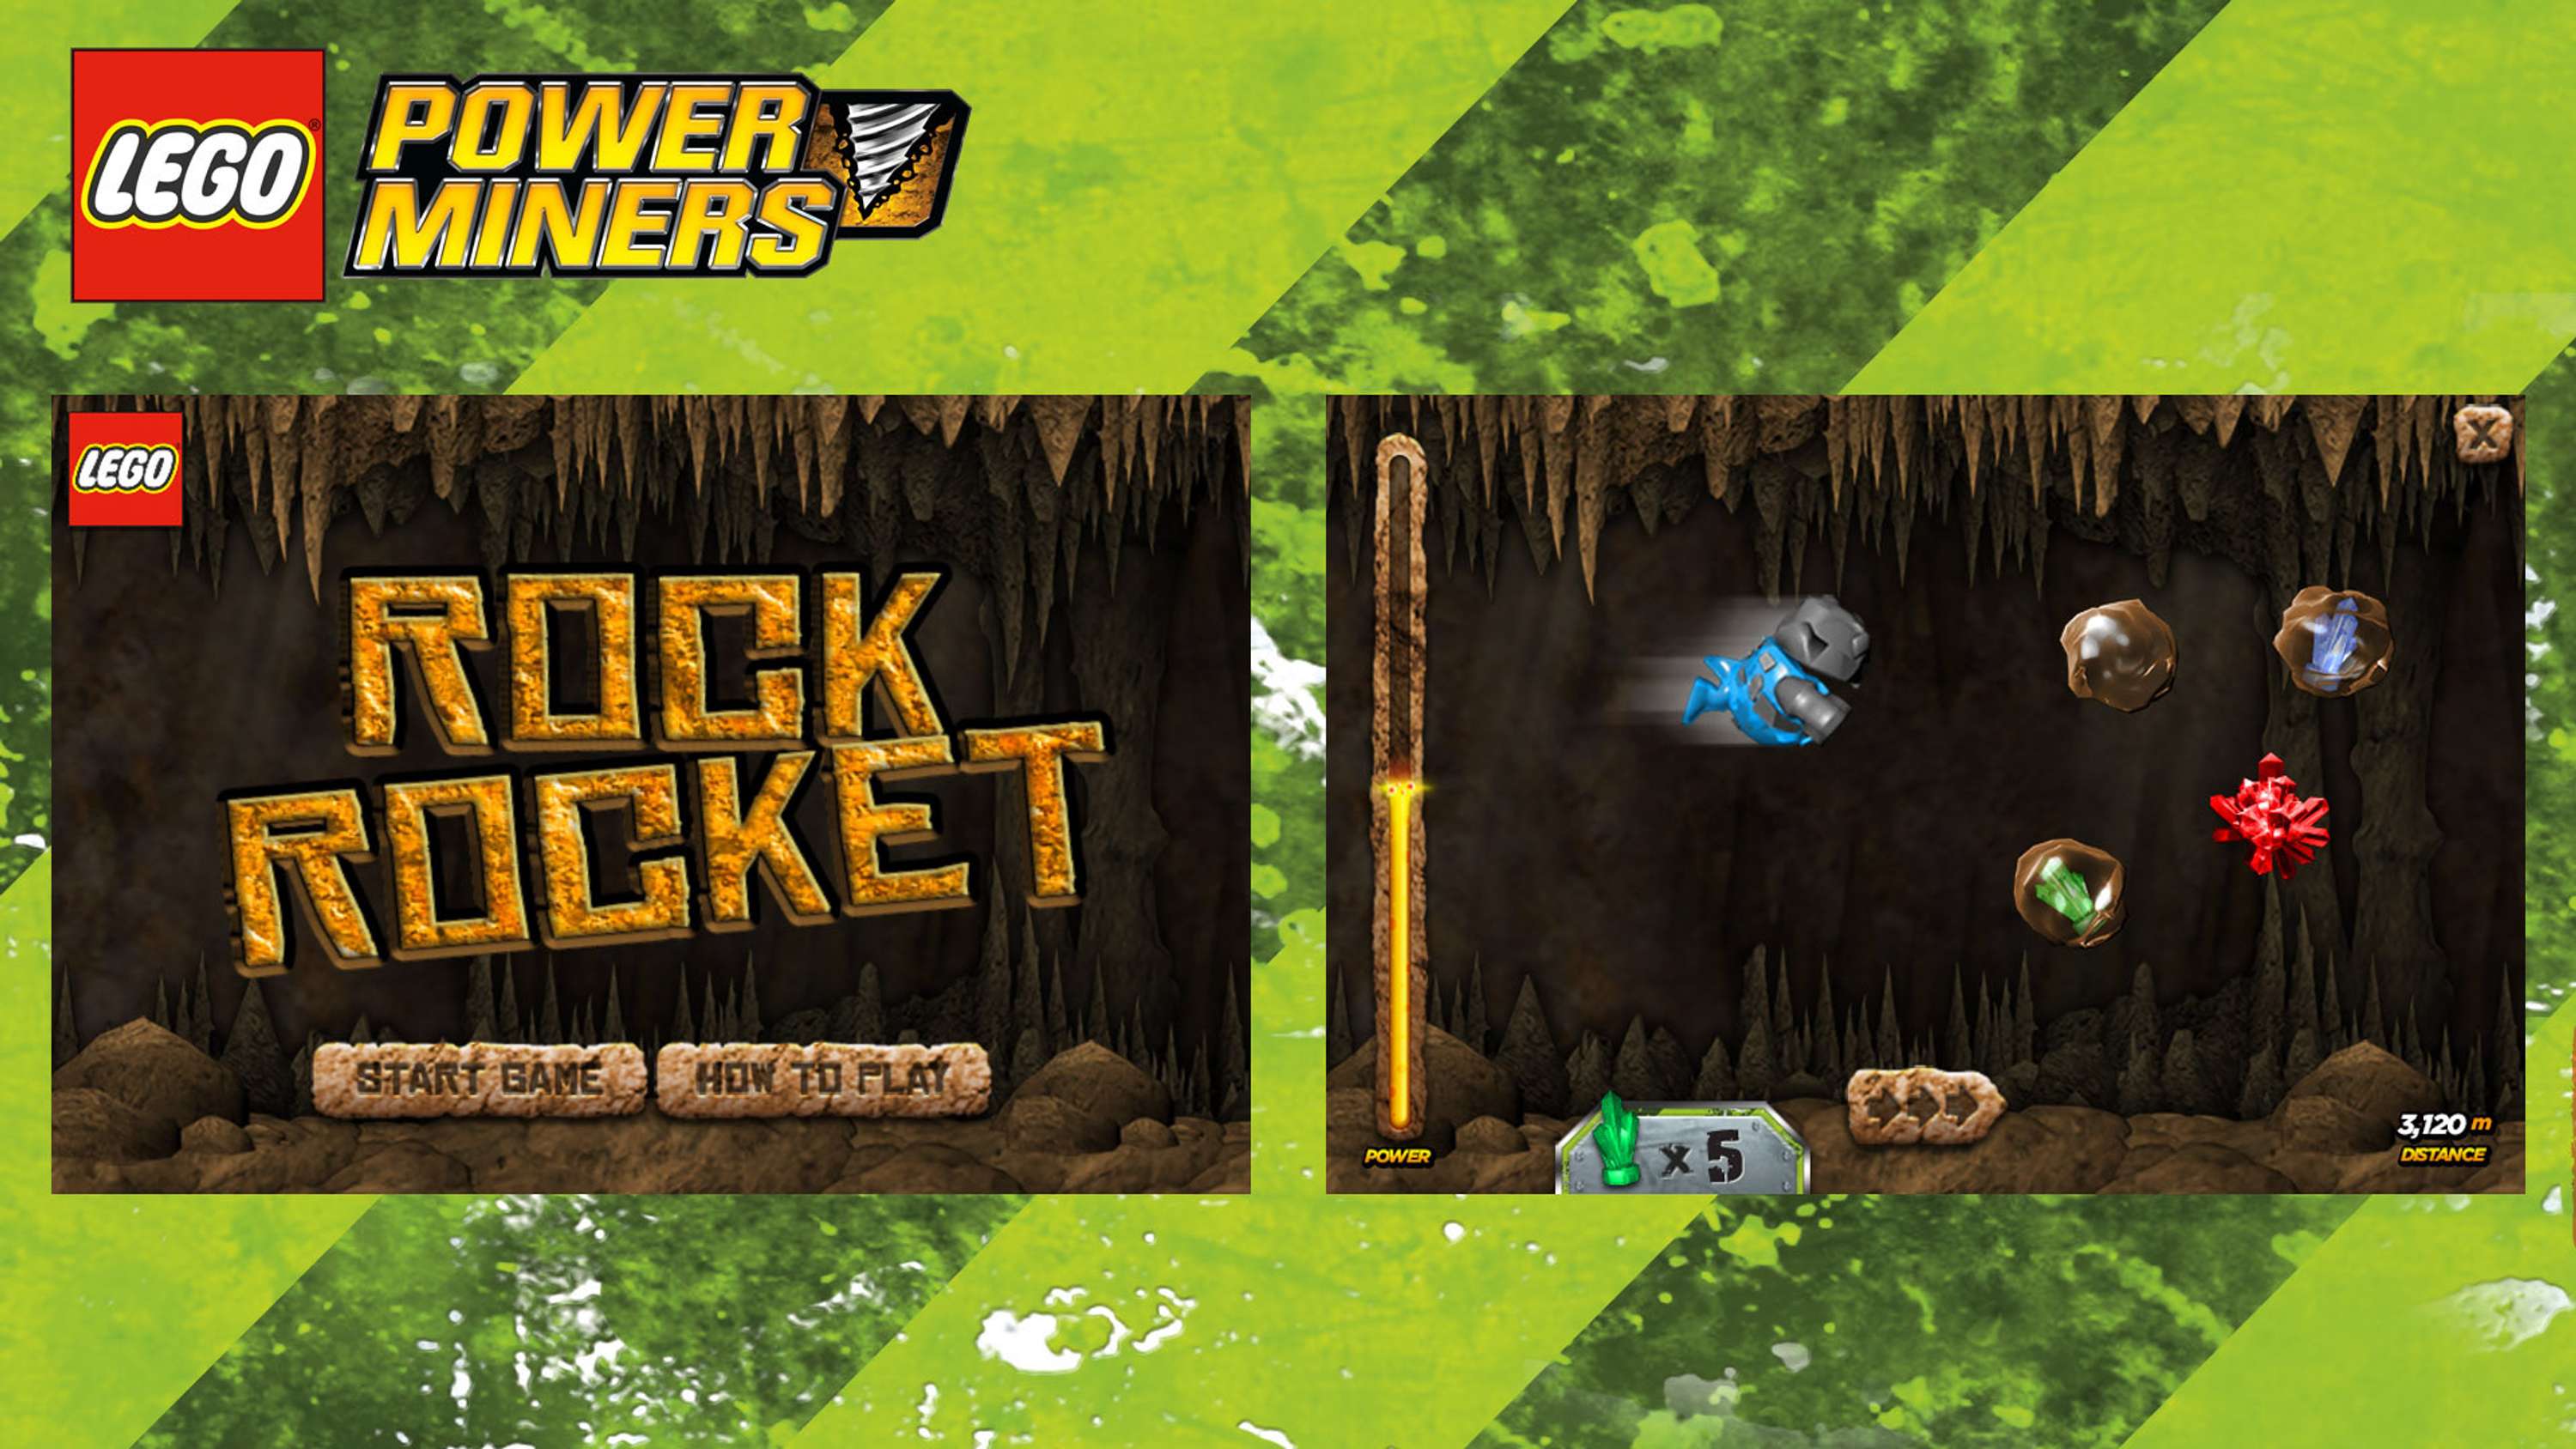 LEGO Power Miners - Rocket Game The Dots